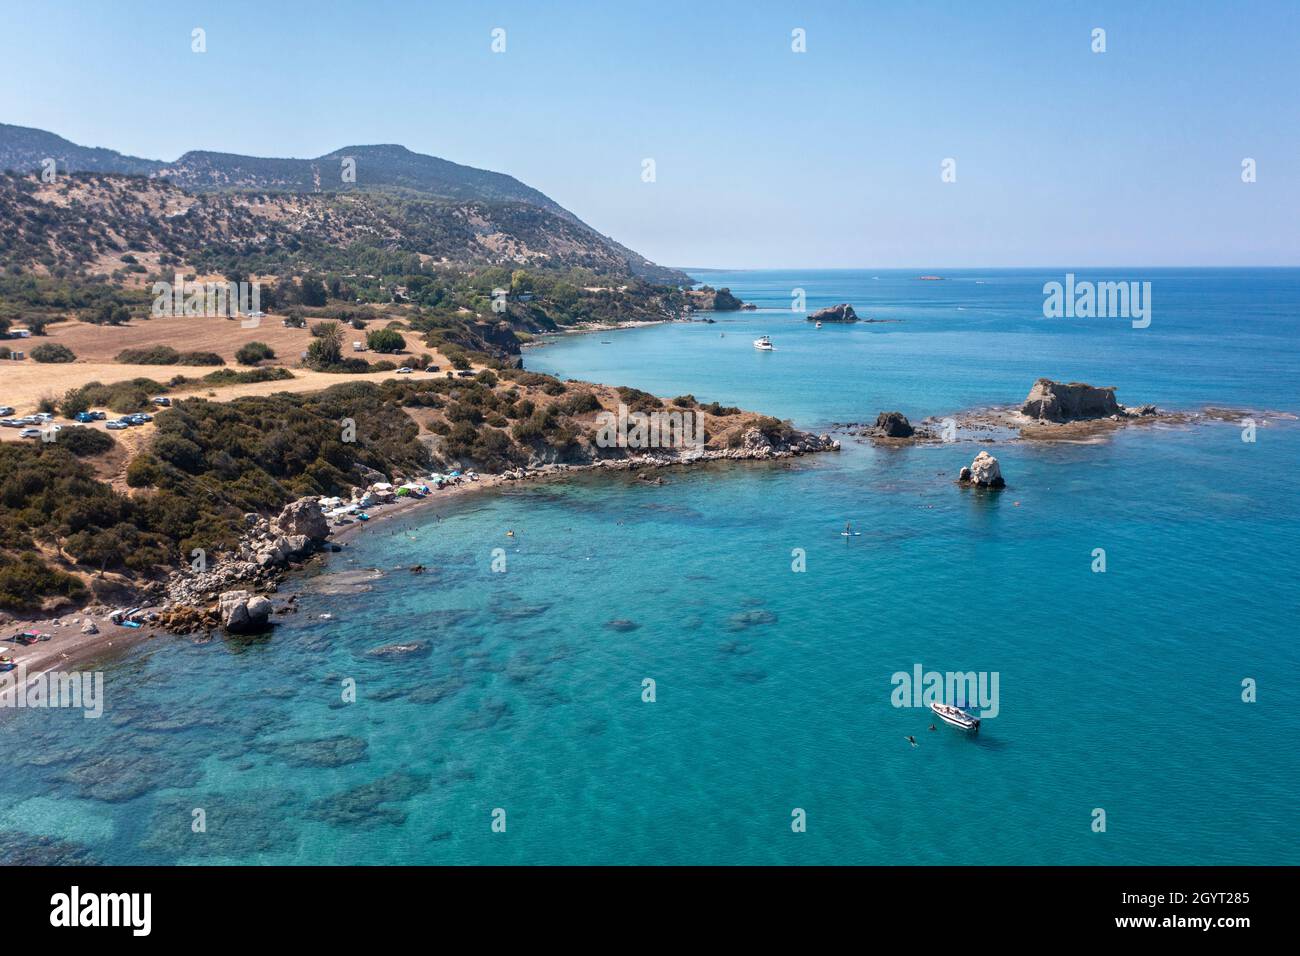 Aerial landscape view of 'Beach for Dogs', Akamas Peninsula, Republic of Cyprus Stock Photo